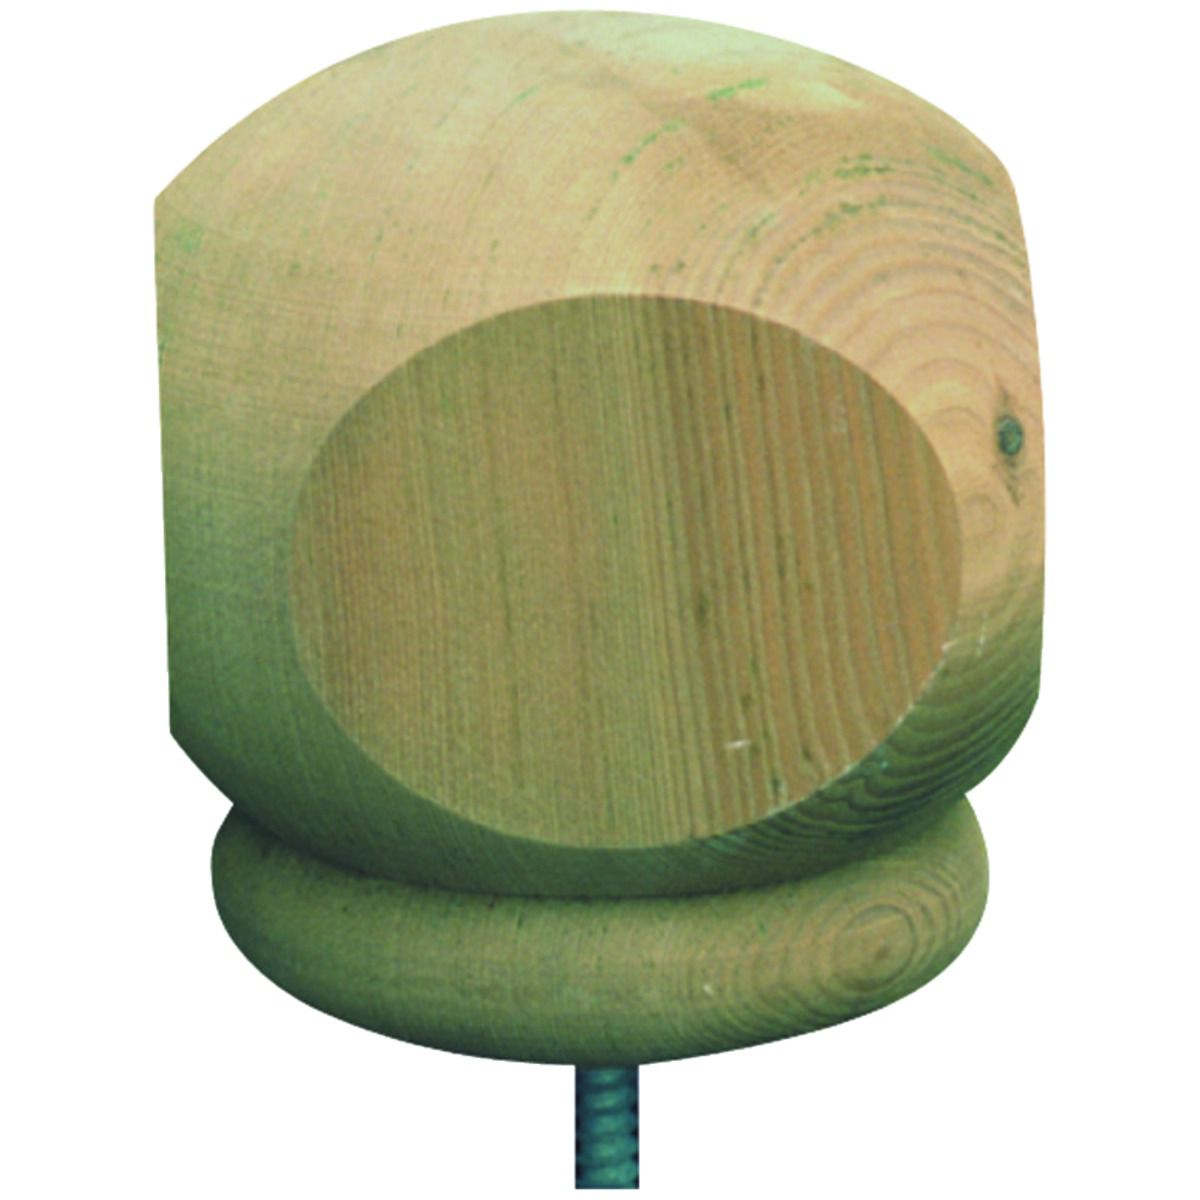 Image of Wickes Squared Deck Post Ball - Green 77 x 77 x 93mm